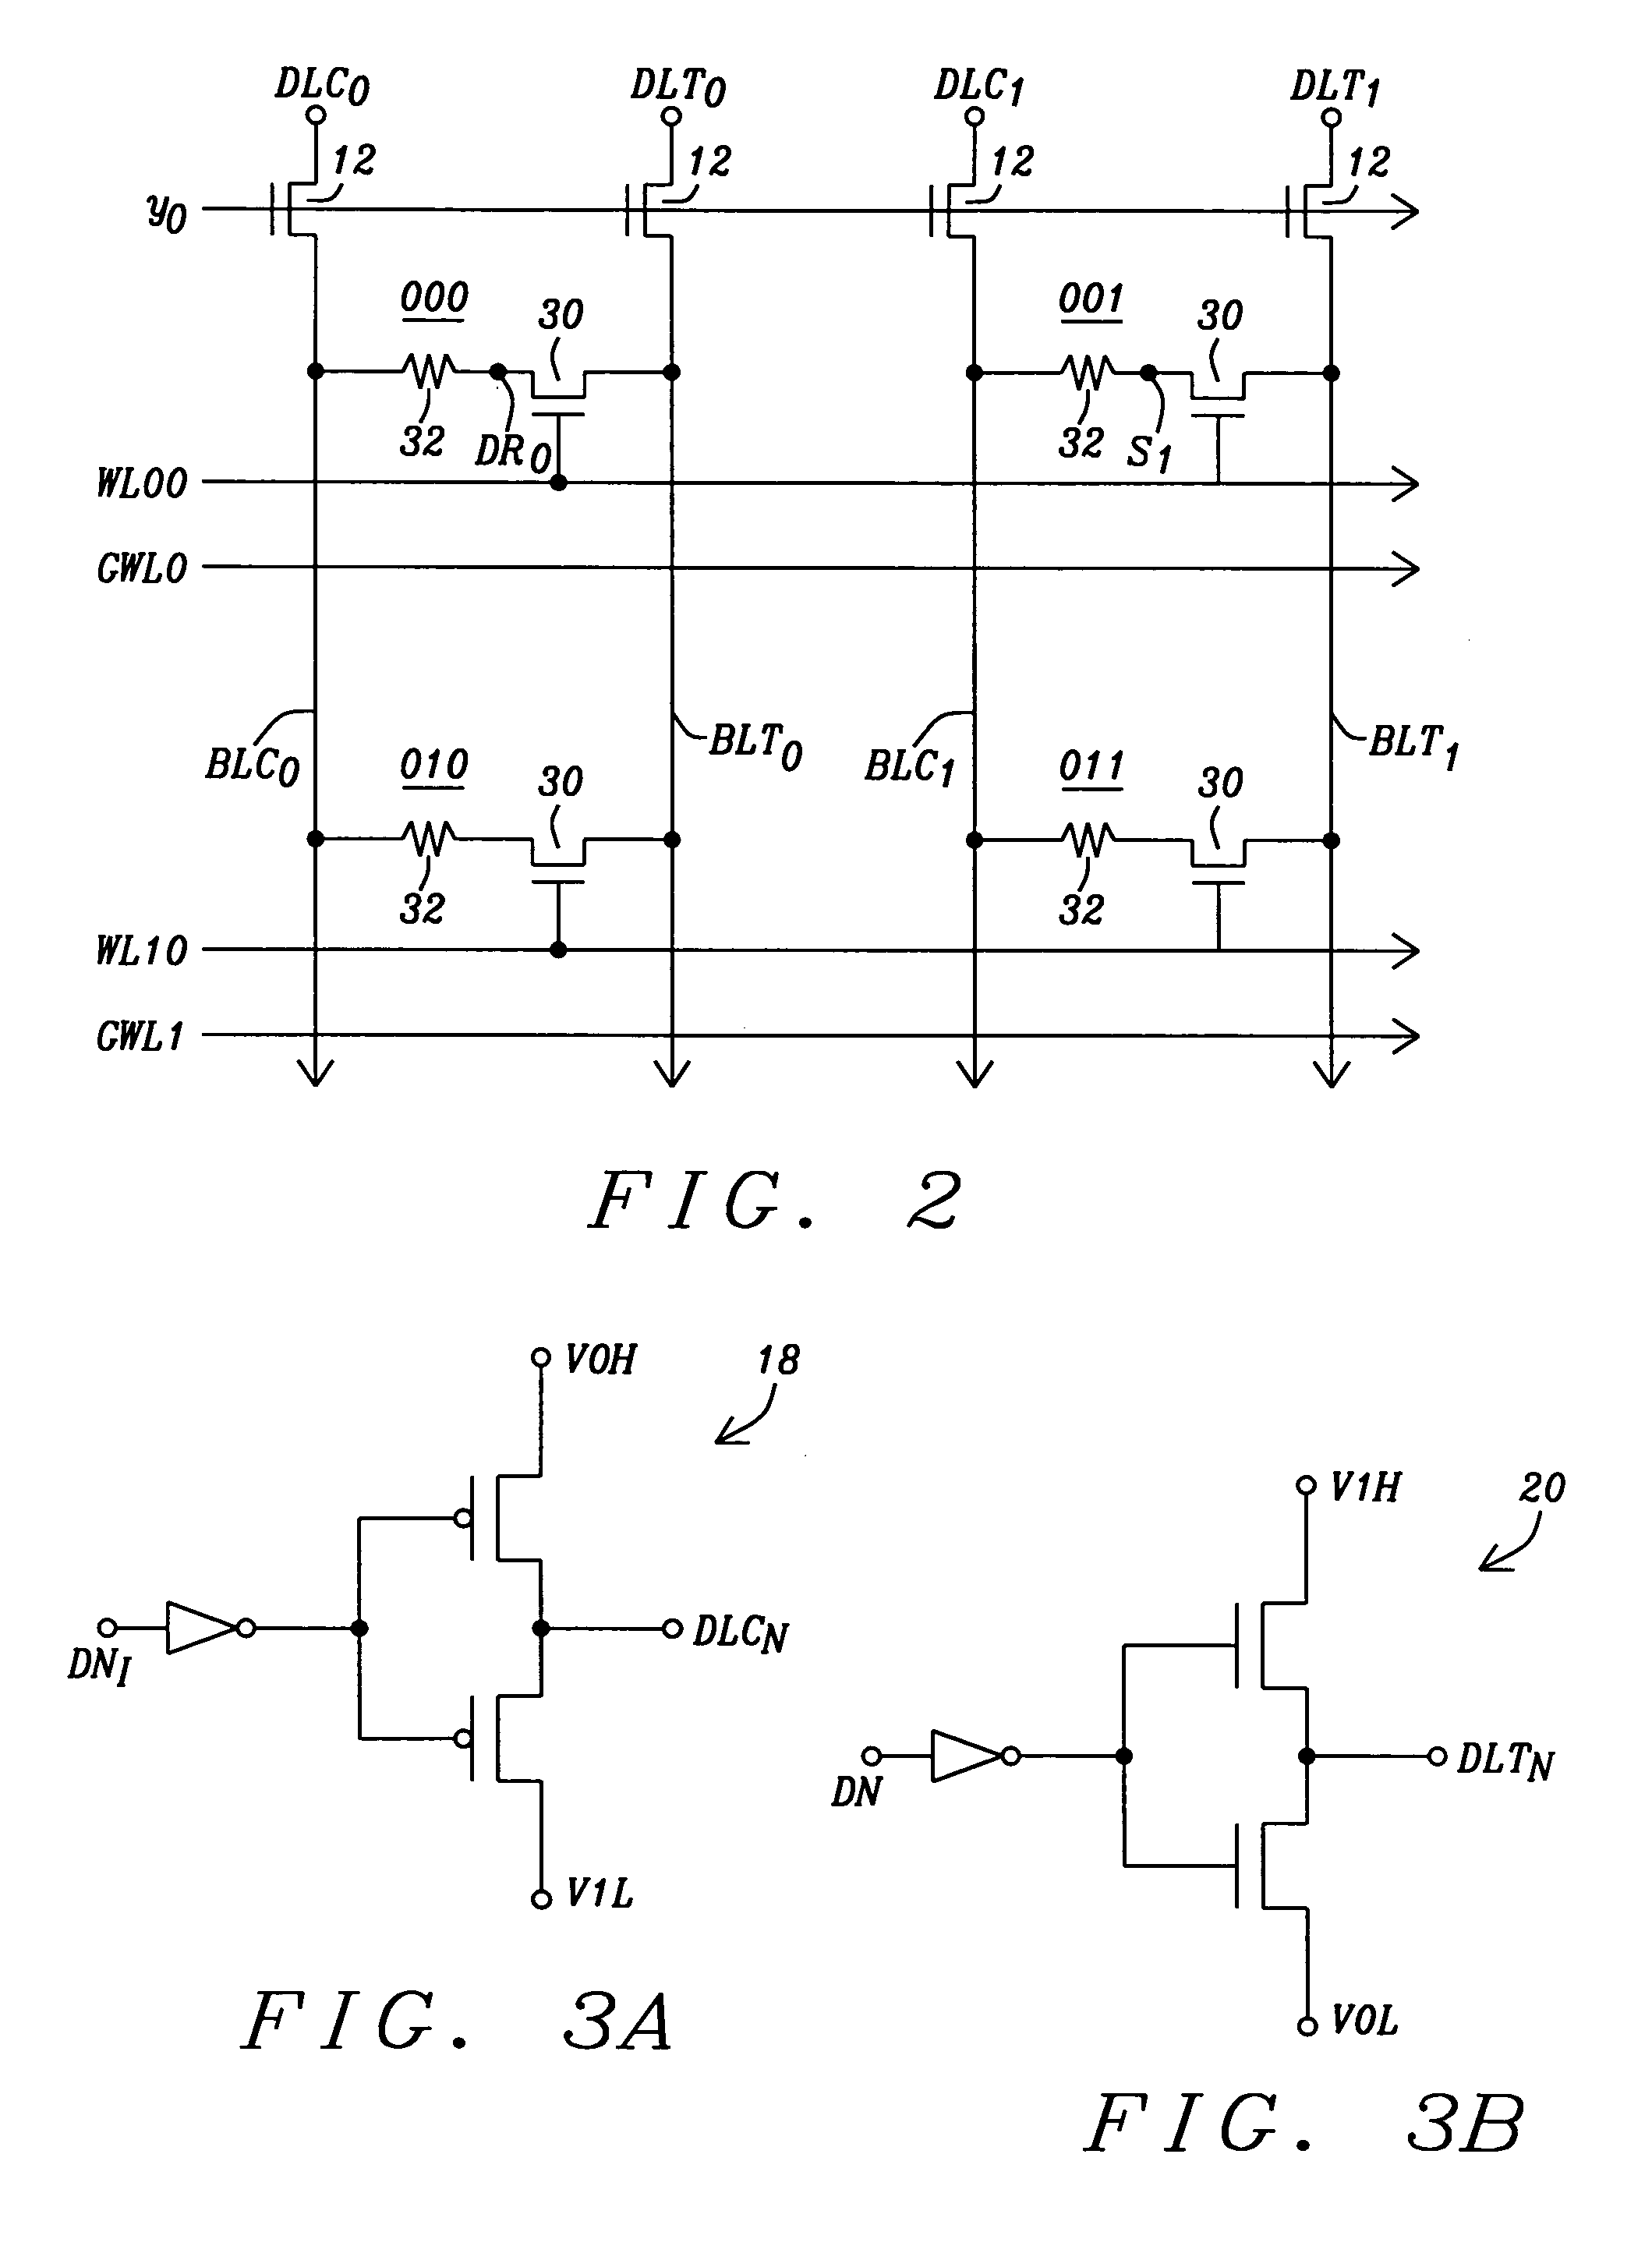 Gate drive voltage boost schemes for memory array II